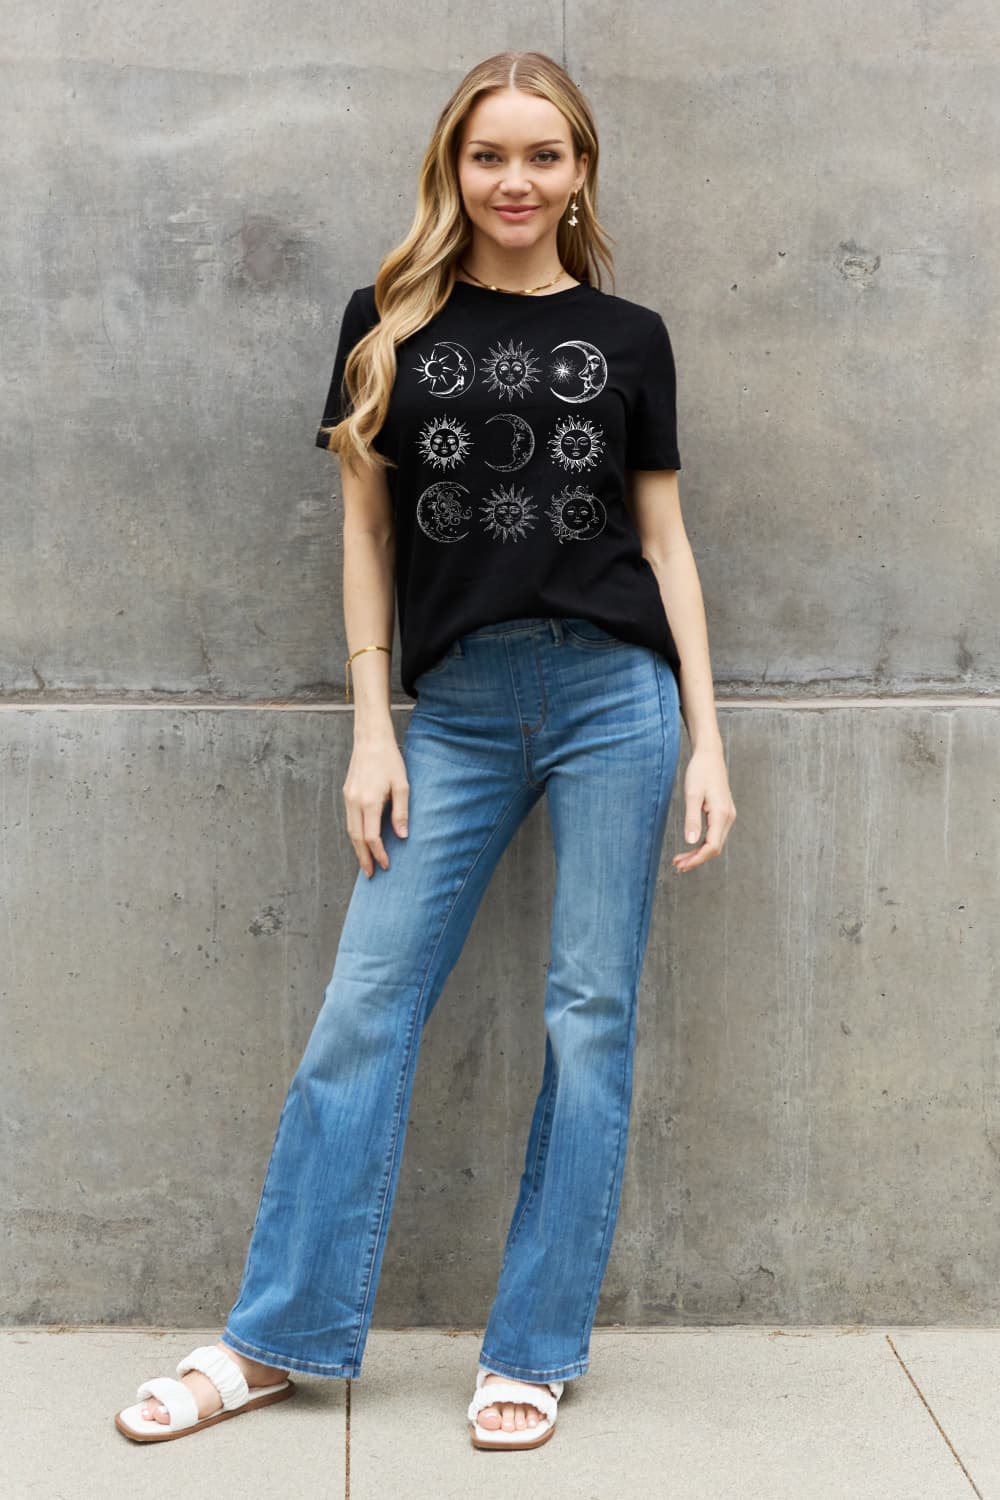 Dark Gray Simply Love Sun and Moon Graphic Cotton Tee Sentient Beauty Fashions Apparel & Accessories